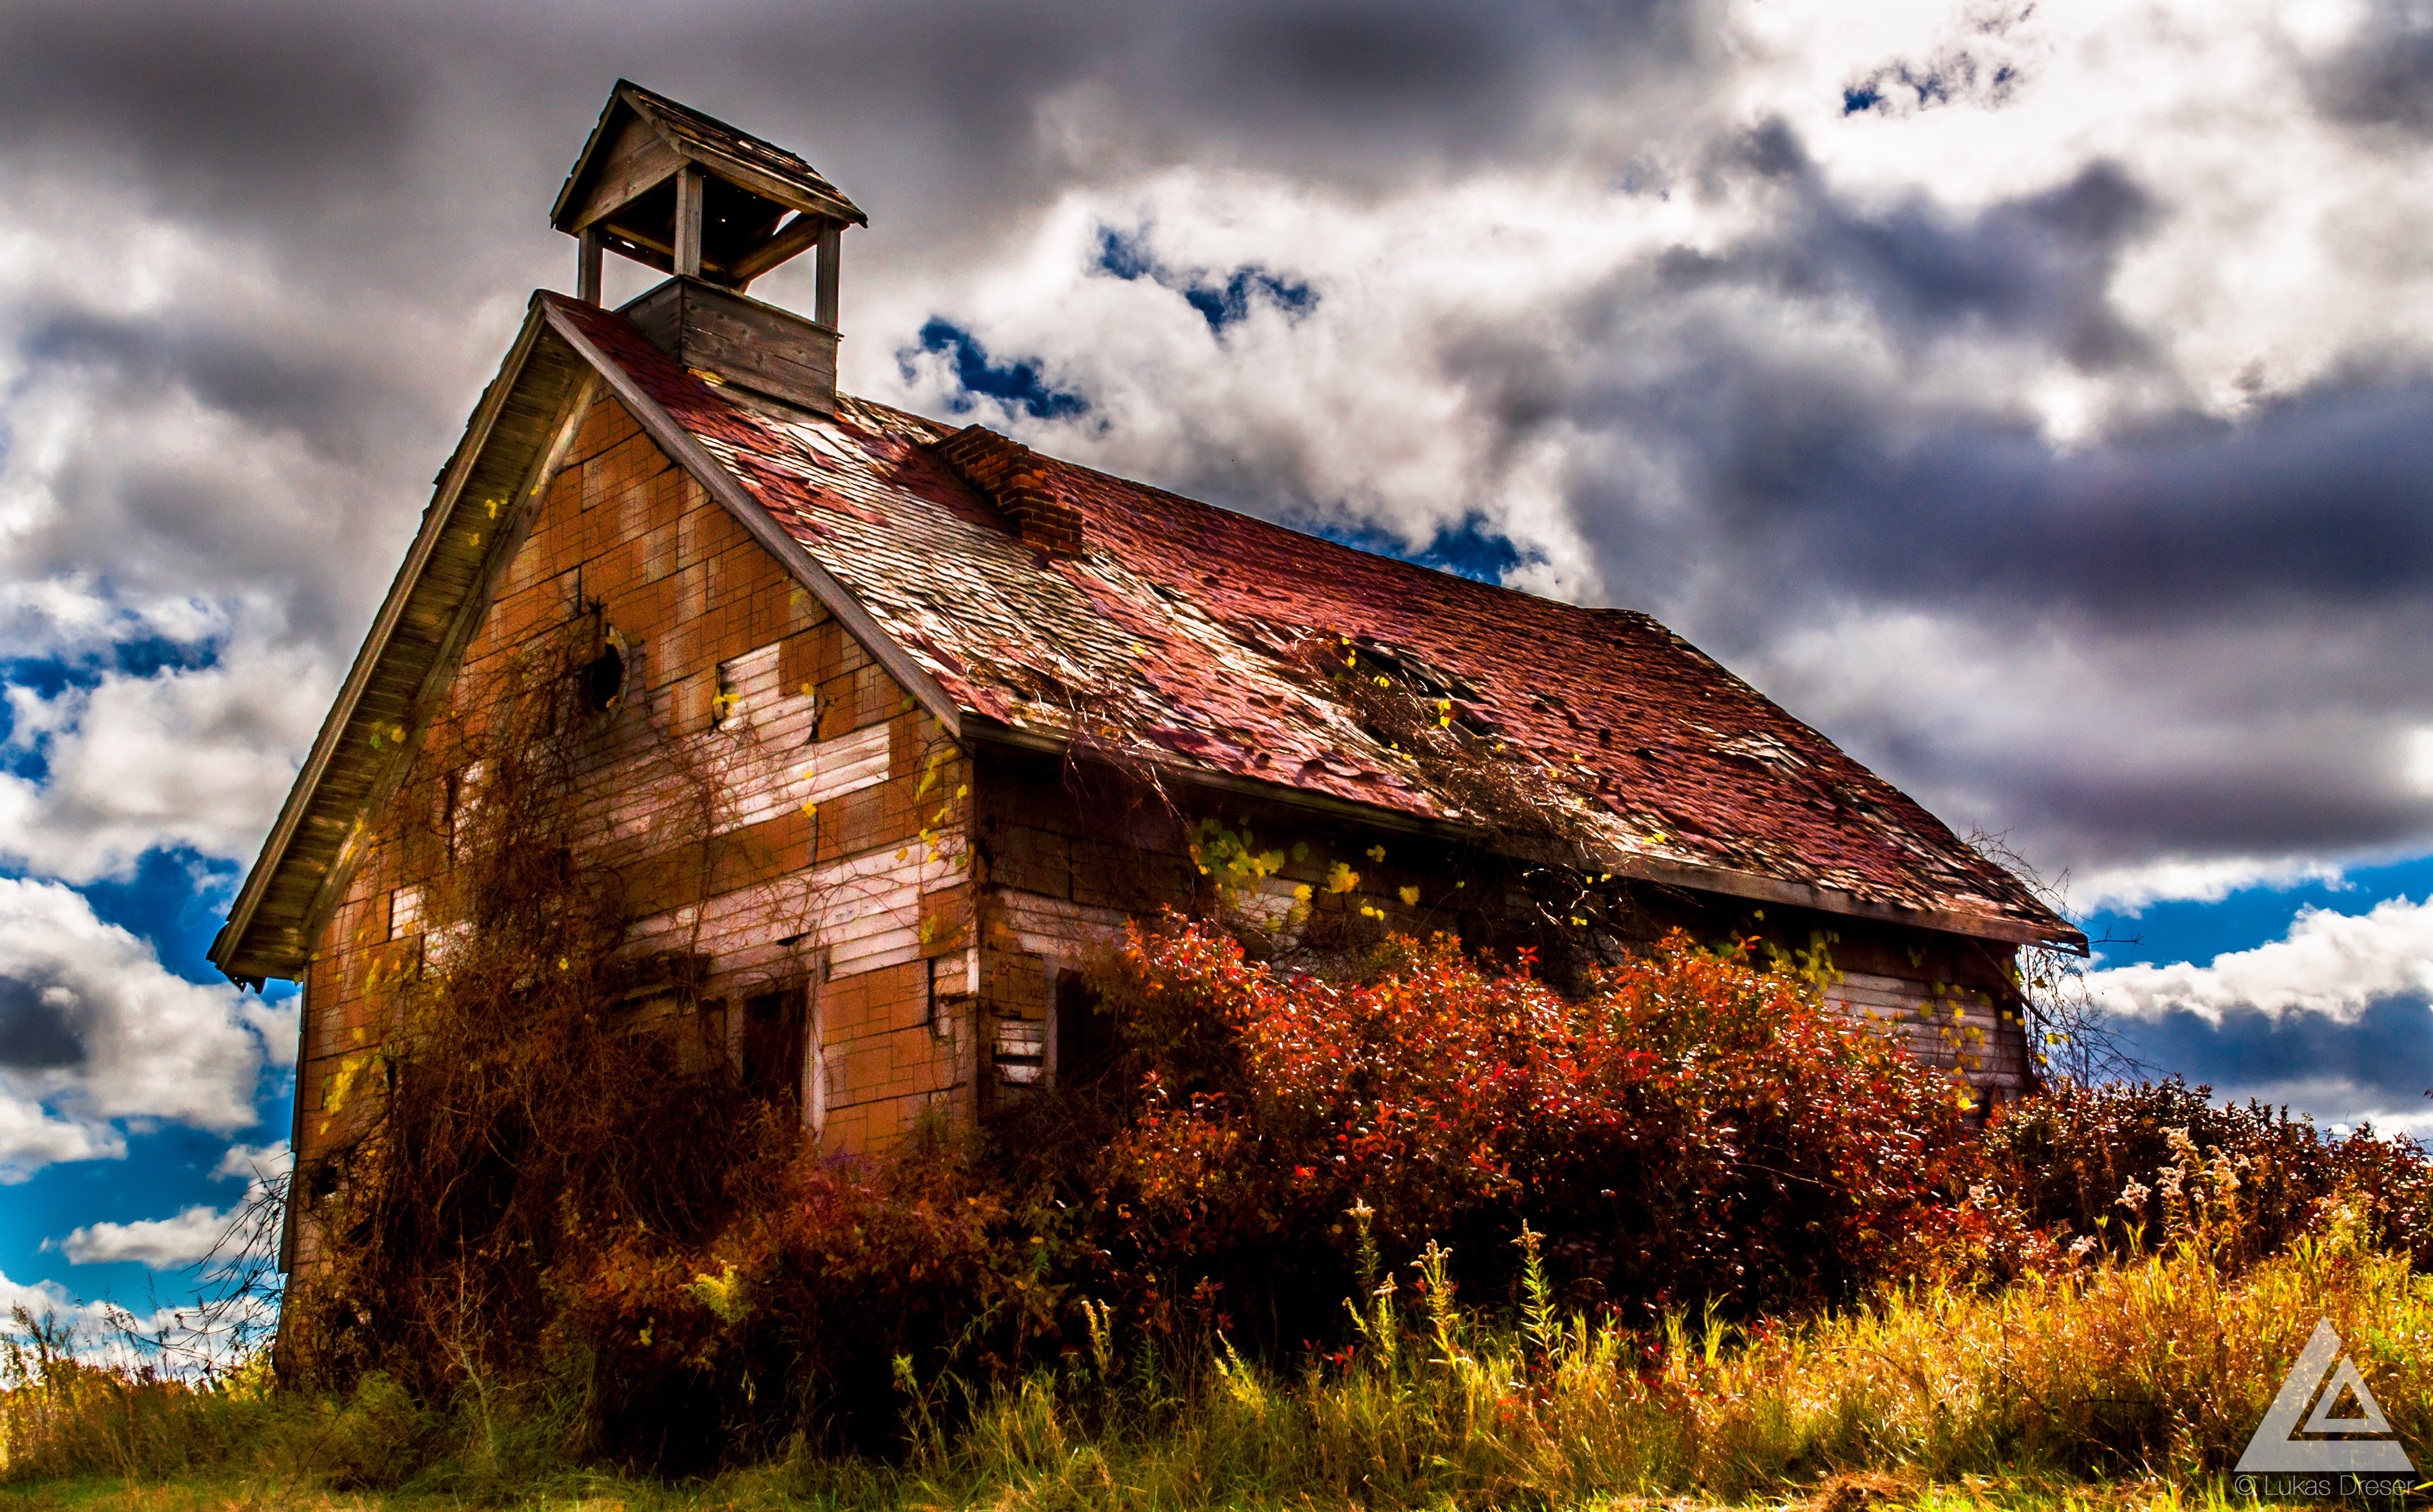 Wallpaper, autumn, urban, fall, abandoned, nature, colors, farmhouse, barn, rural, landscape, scary, colorful, antique, Michigan, farm, empty, ghost, country, religion, stormy, chapel, creepy, spooky, falling, lukas, angry, environment, exploration